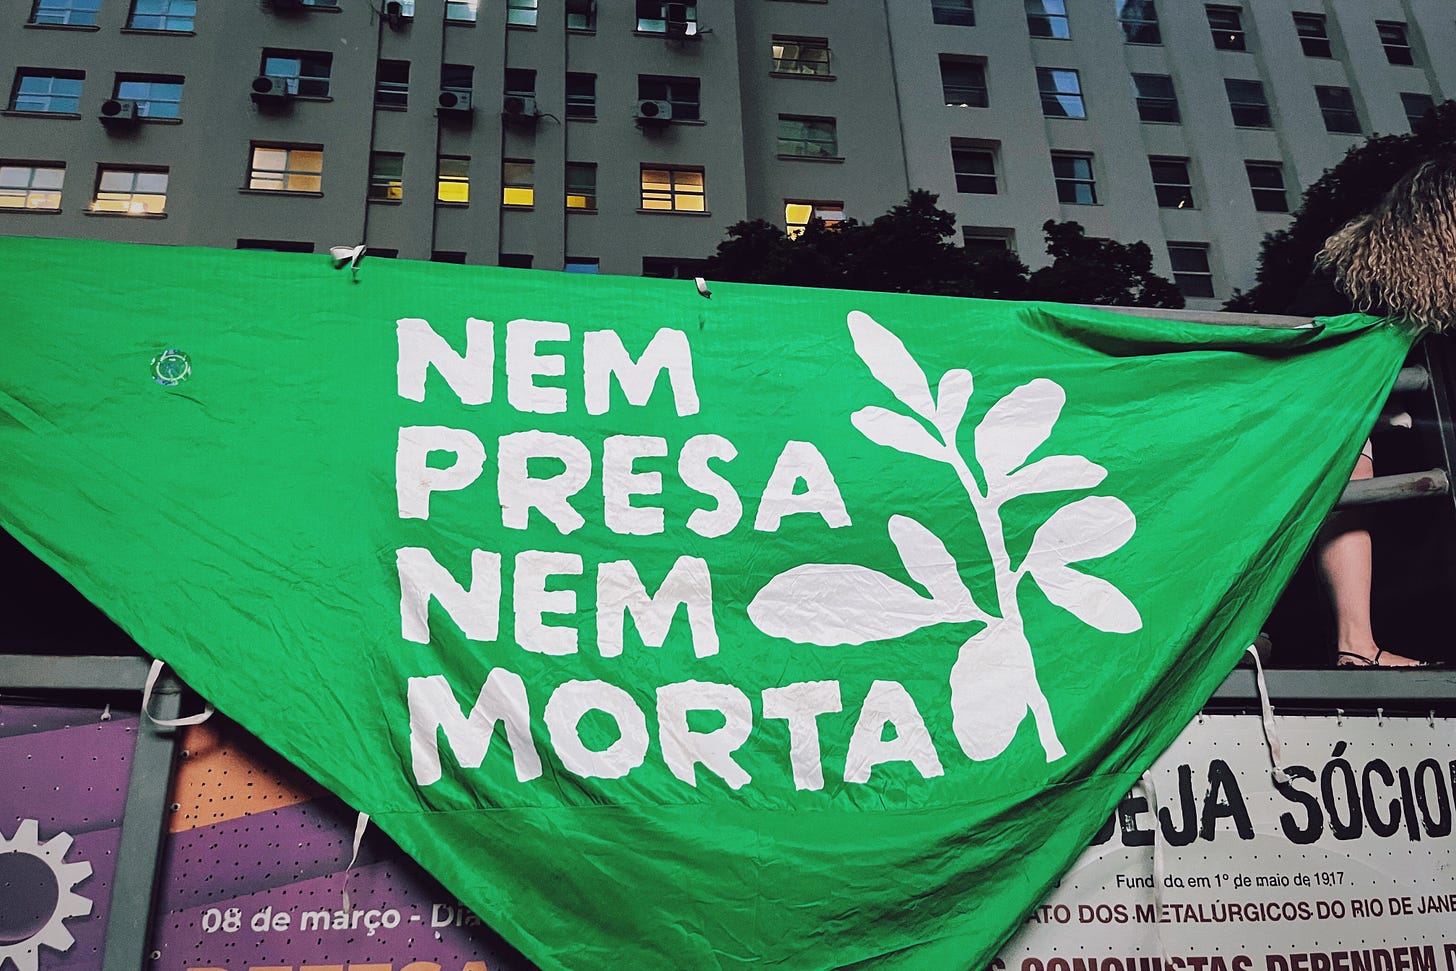 Photograph of a large green banner that says NEM PRESA NEM MORTA, hanging from the side of a bus during the Women's Day march in Rio de Janeiro.